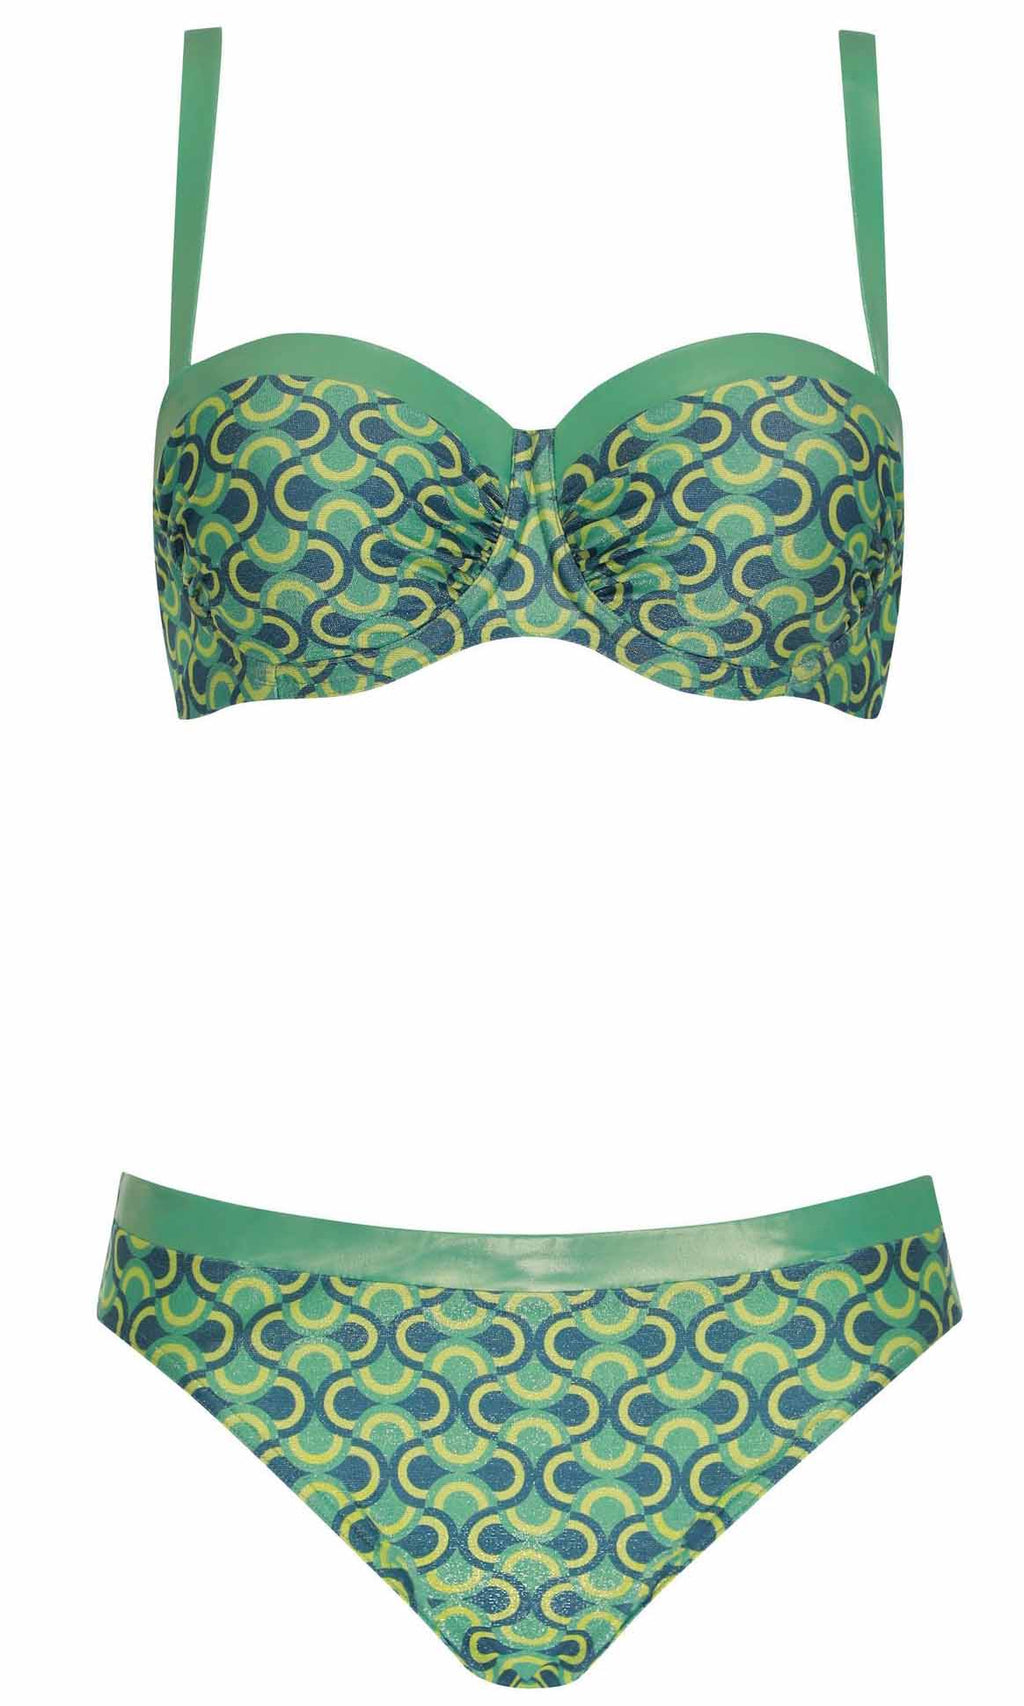 Bikini Set Limelicious, Special Order B Cup to G Cup